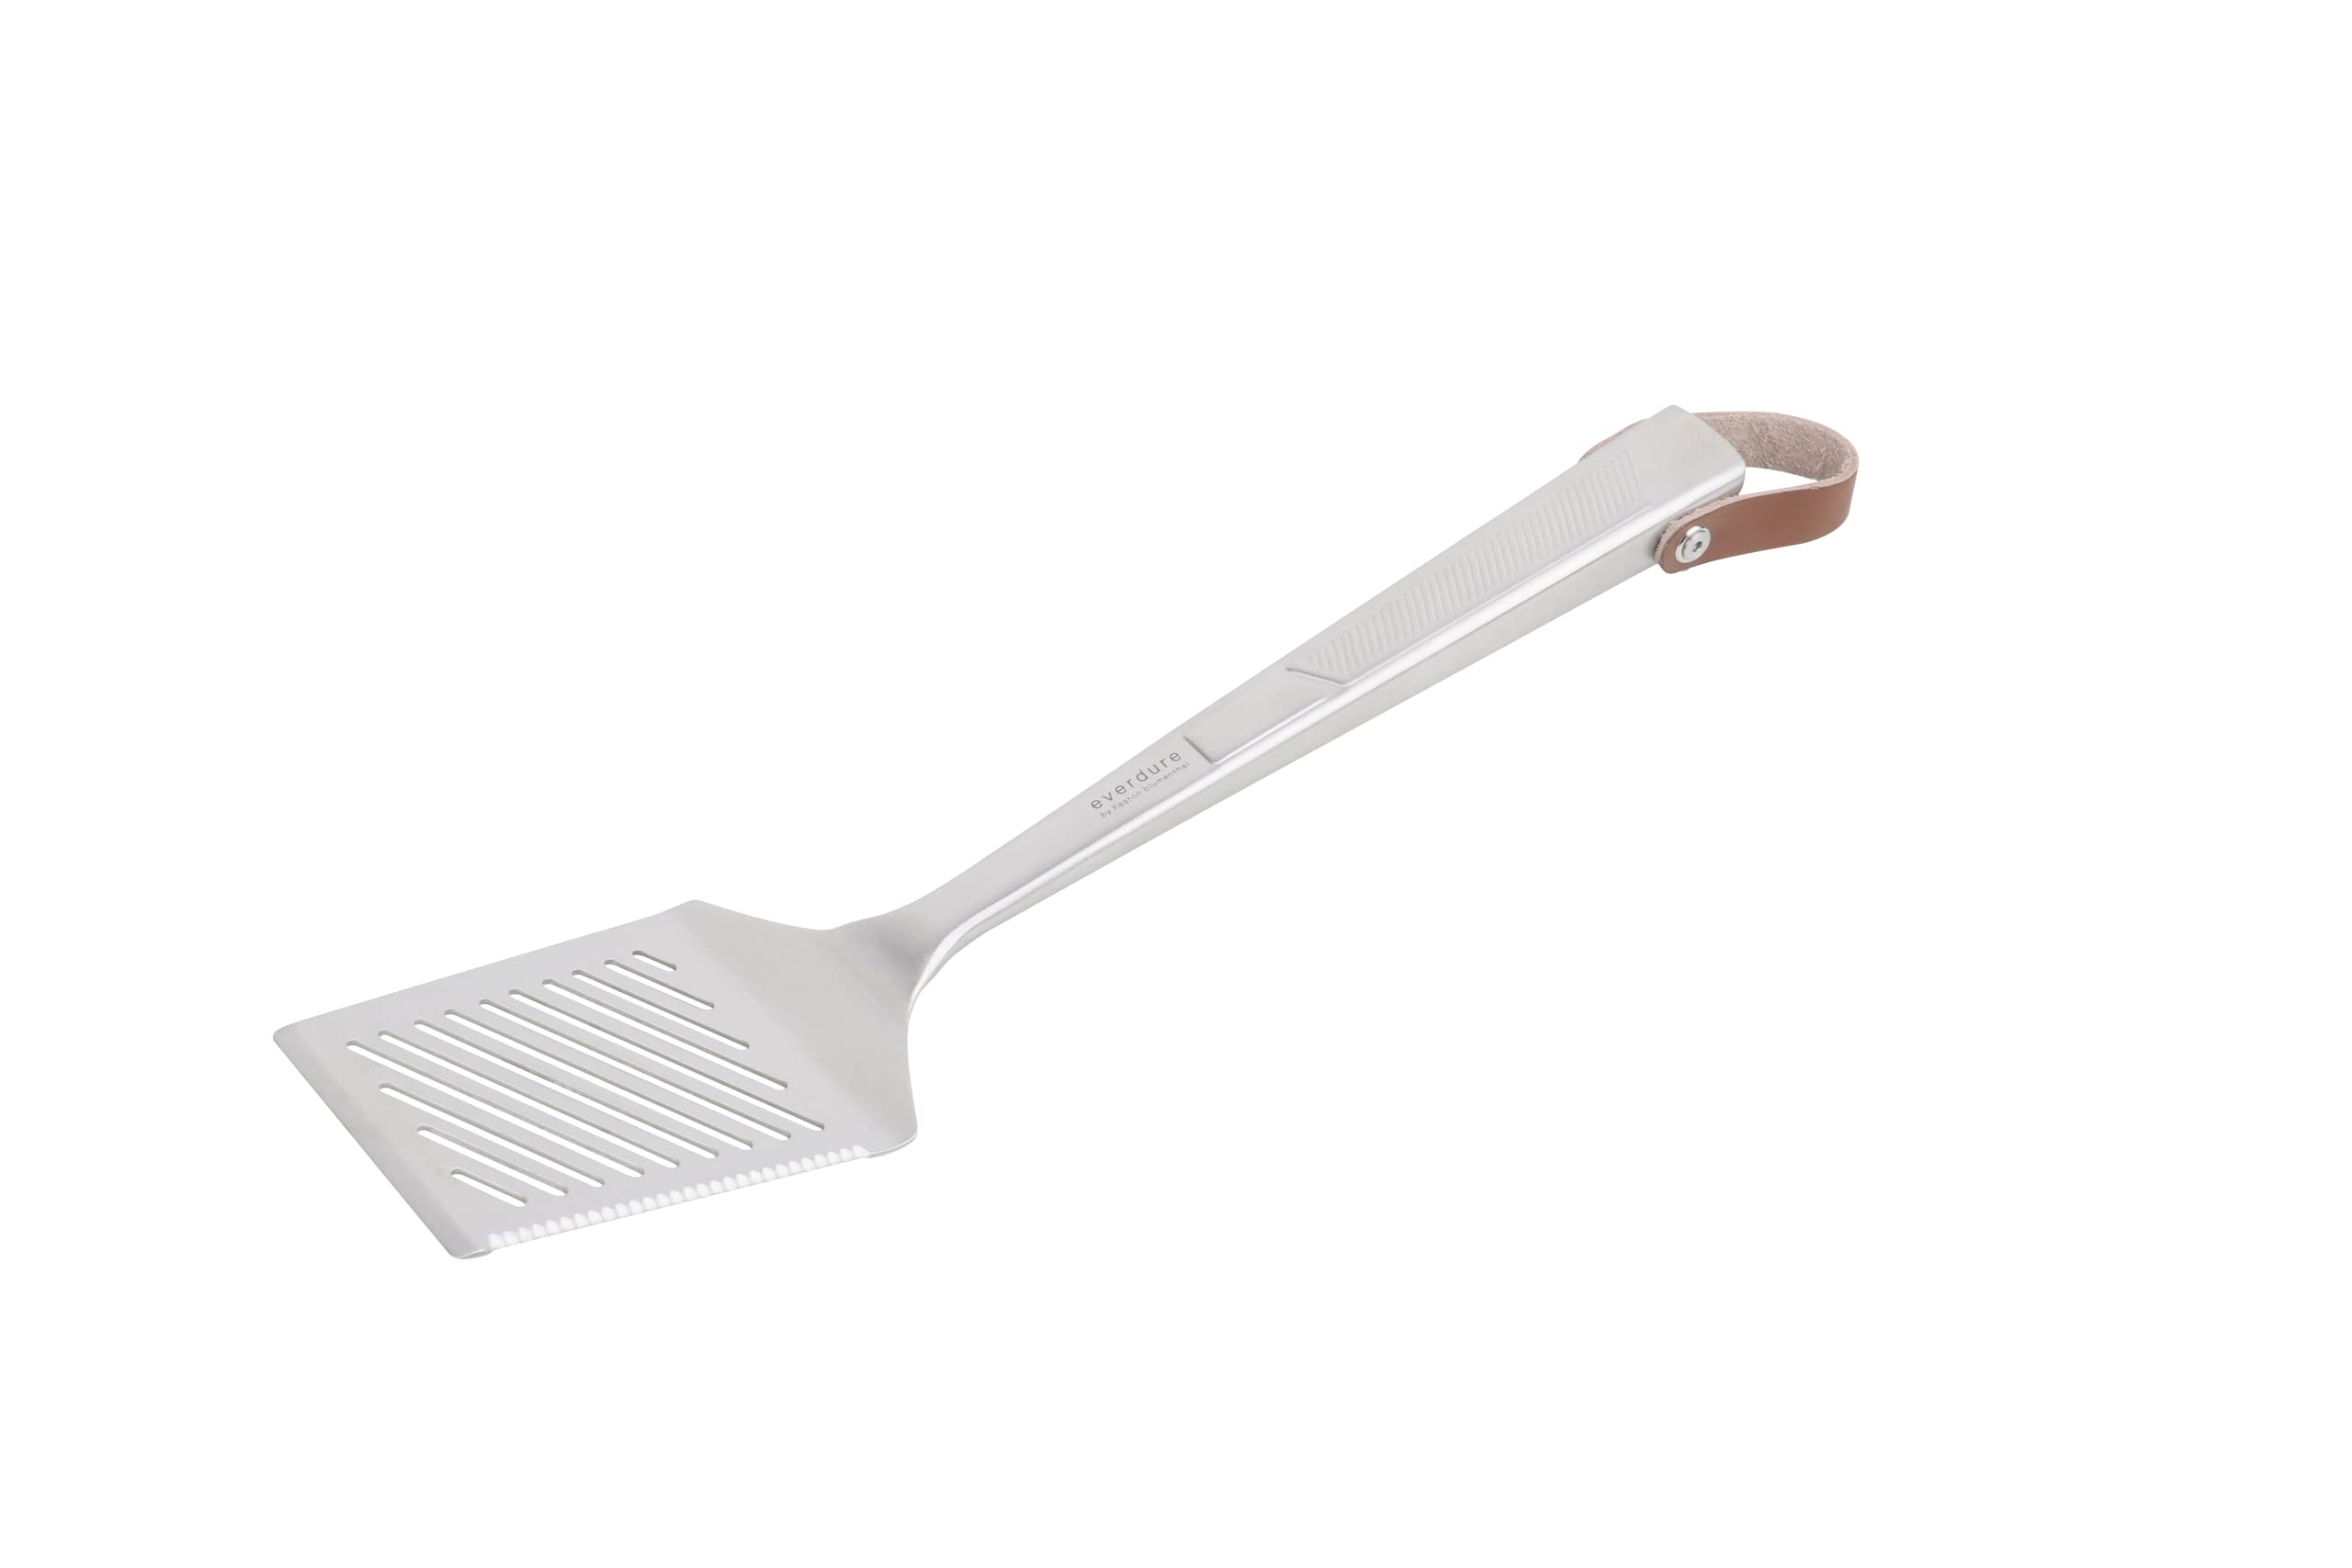 Everdure Stainless Steel Spatula, 14 Inch Slotted Spatula with Brown Leather Hang Strap and Easy Grip Handle, Great for BBQ Gril